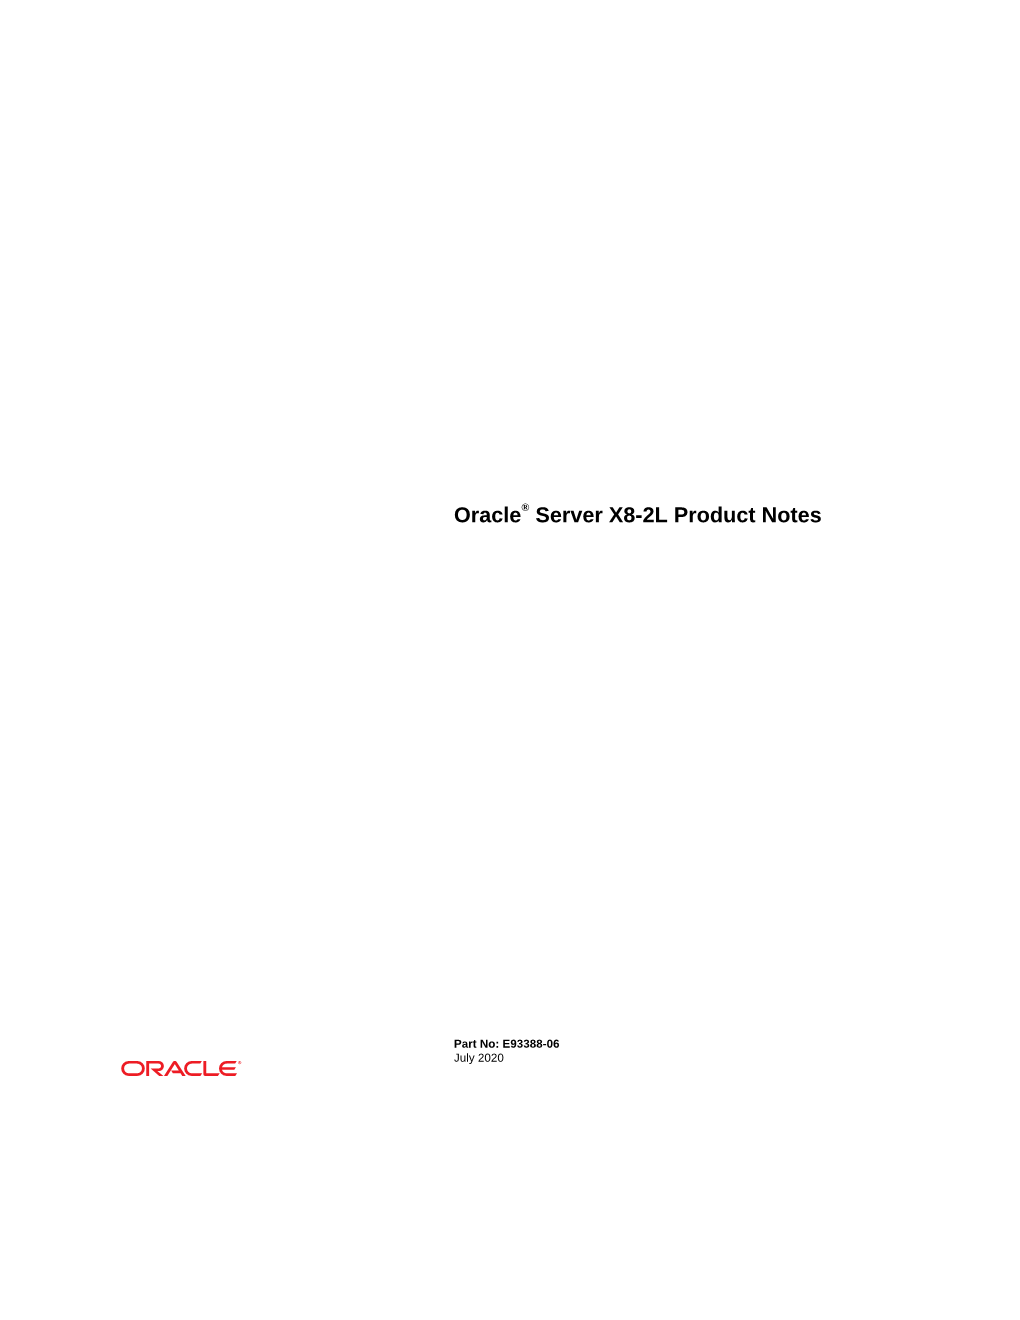 Oracle® Server X8-2L Product Notes